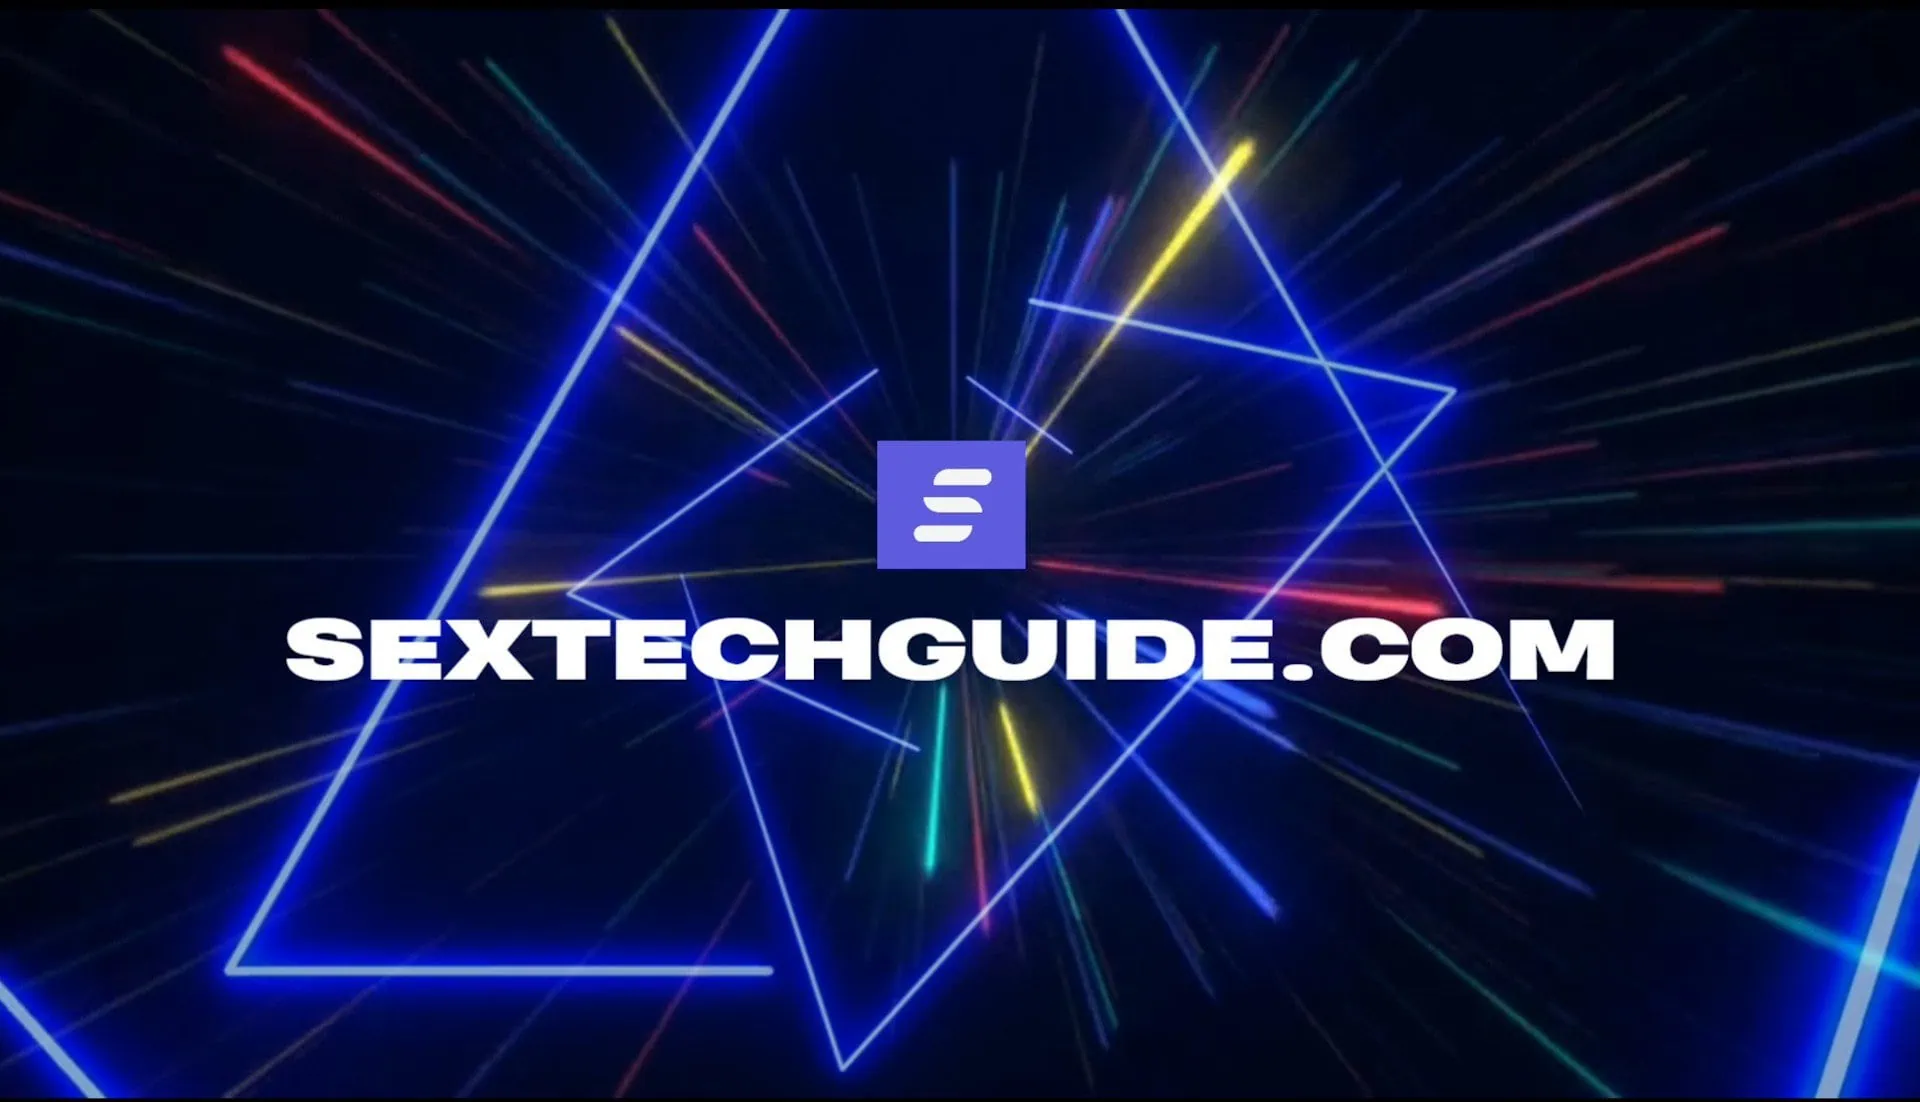 The words sextechguide com on a dark background.